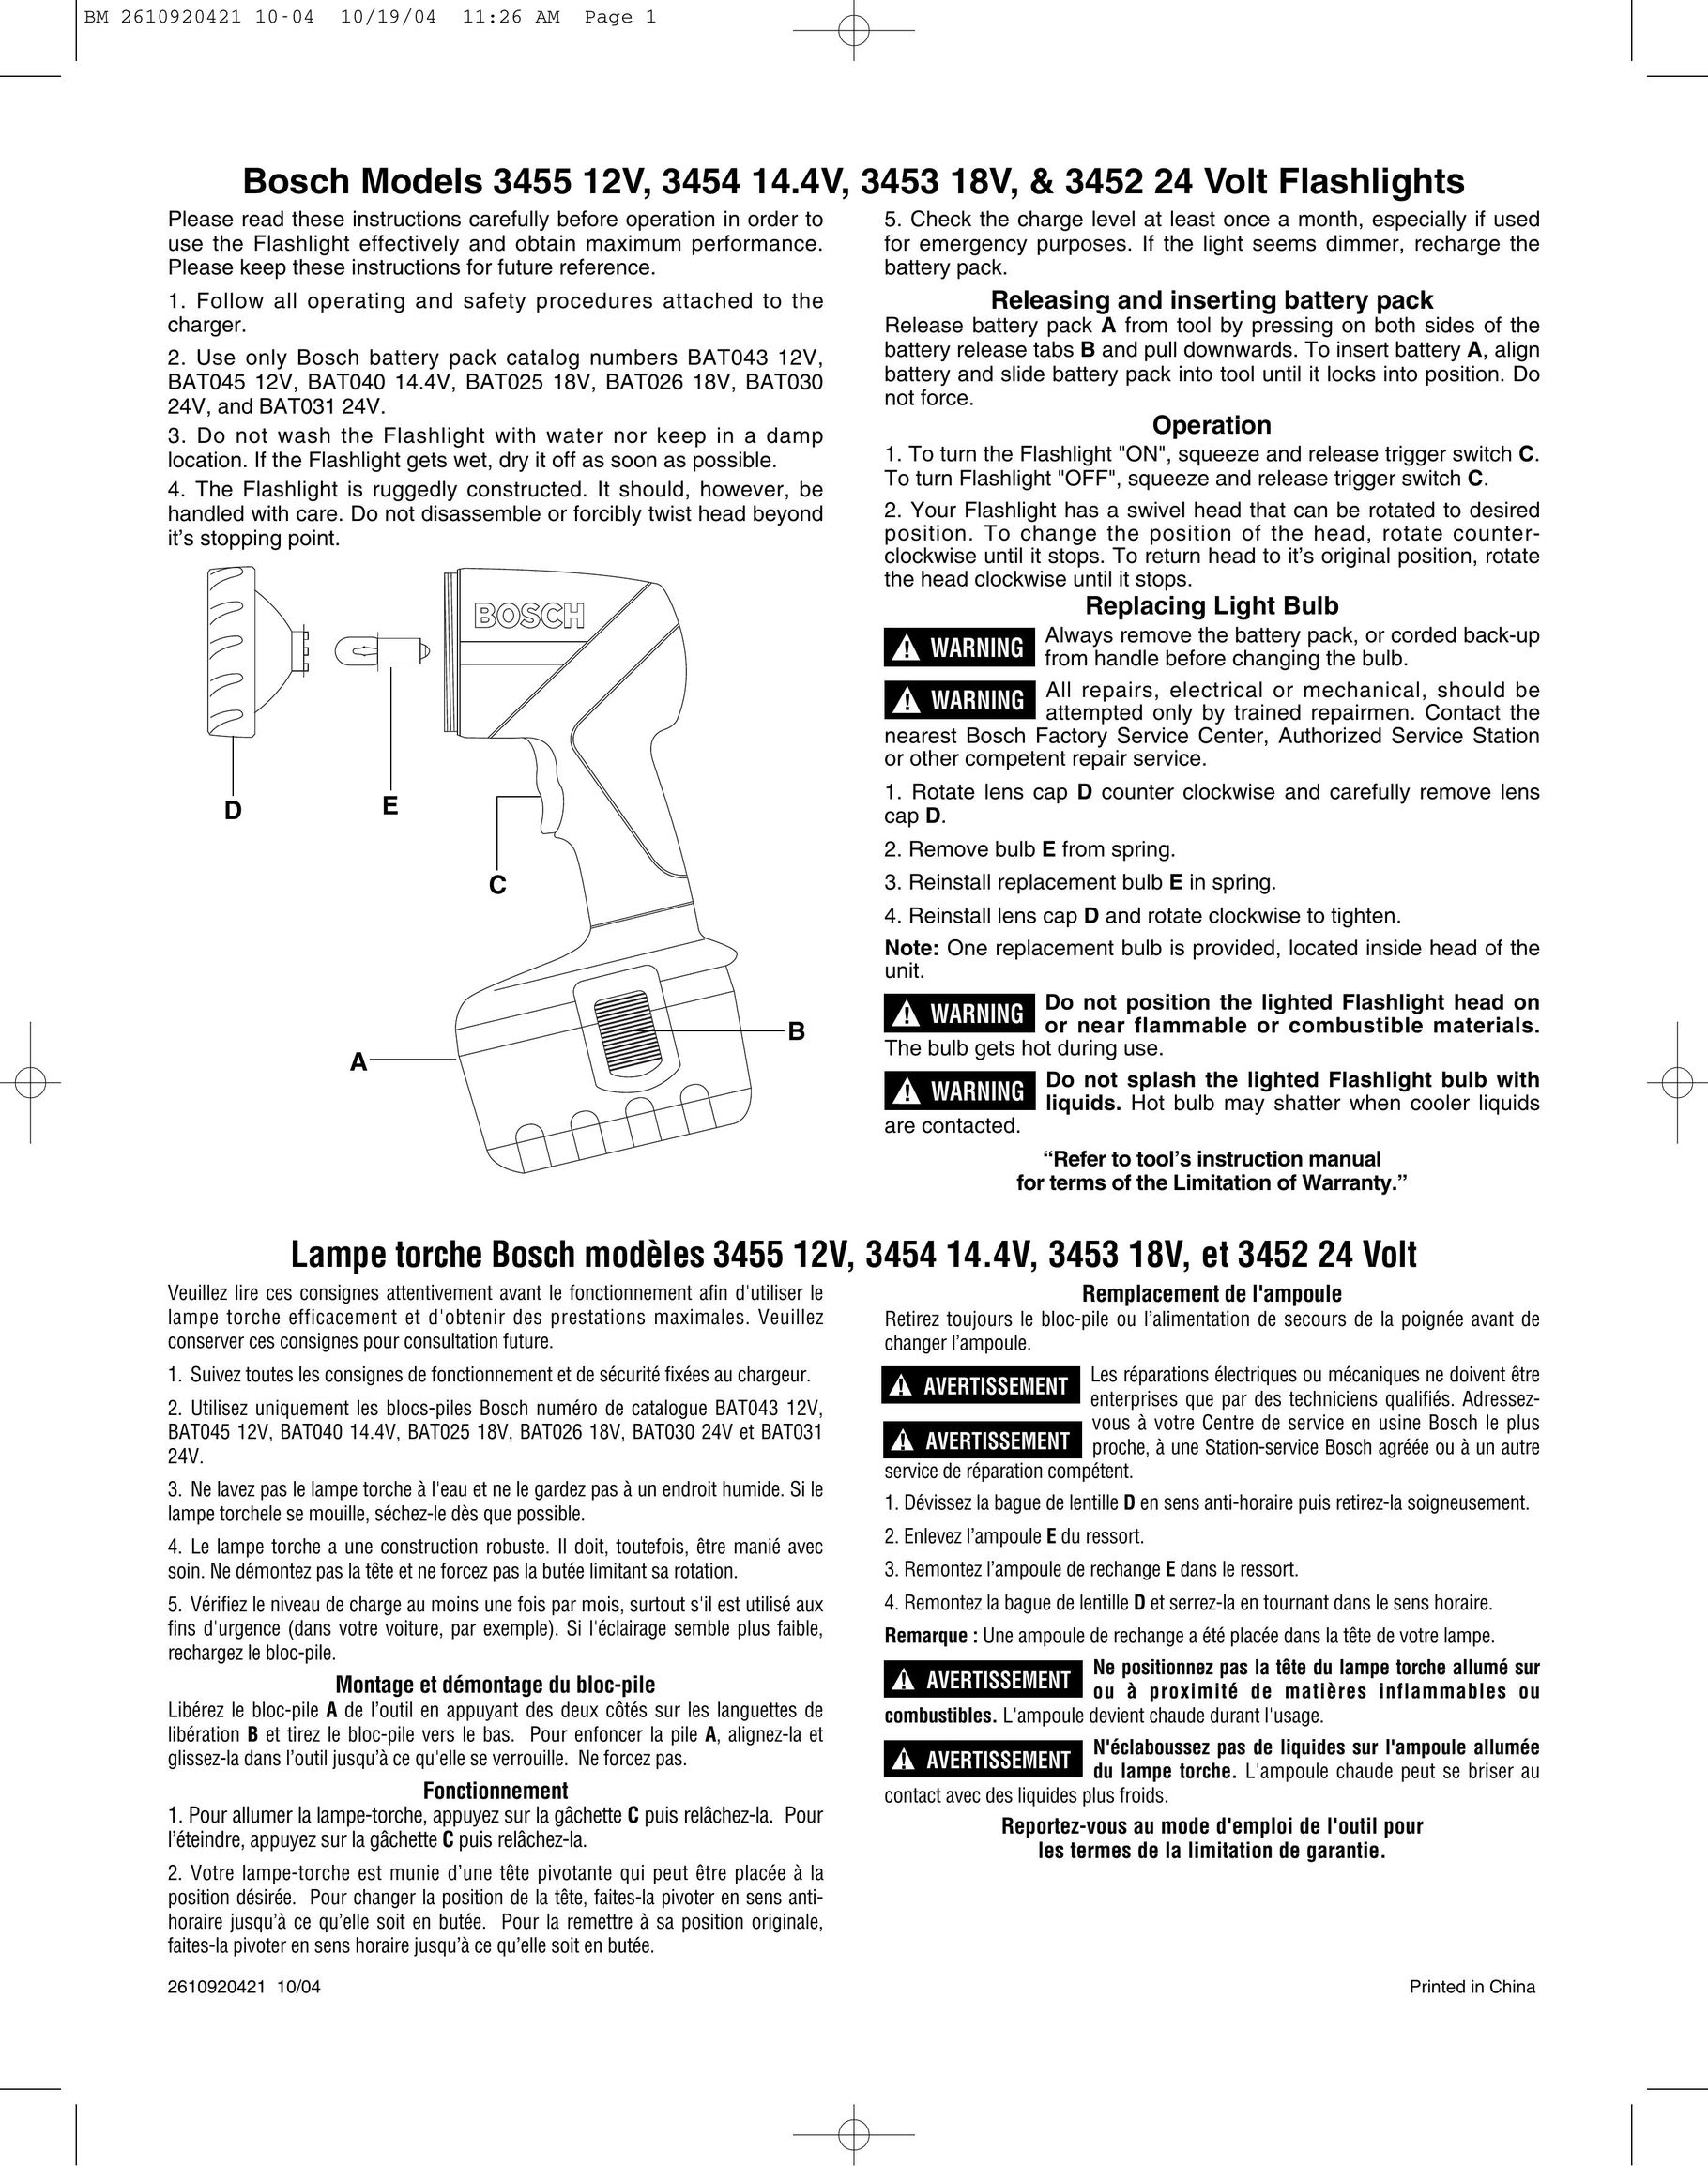 Bosch Appliances 3452 24 Home Safety Product User Manual